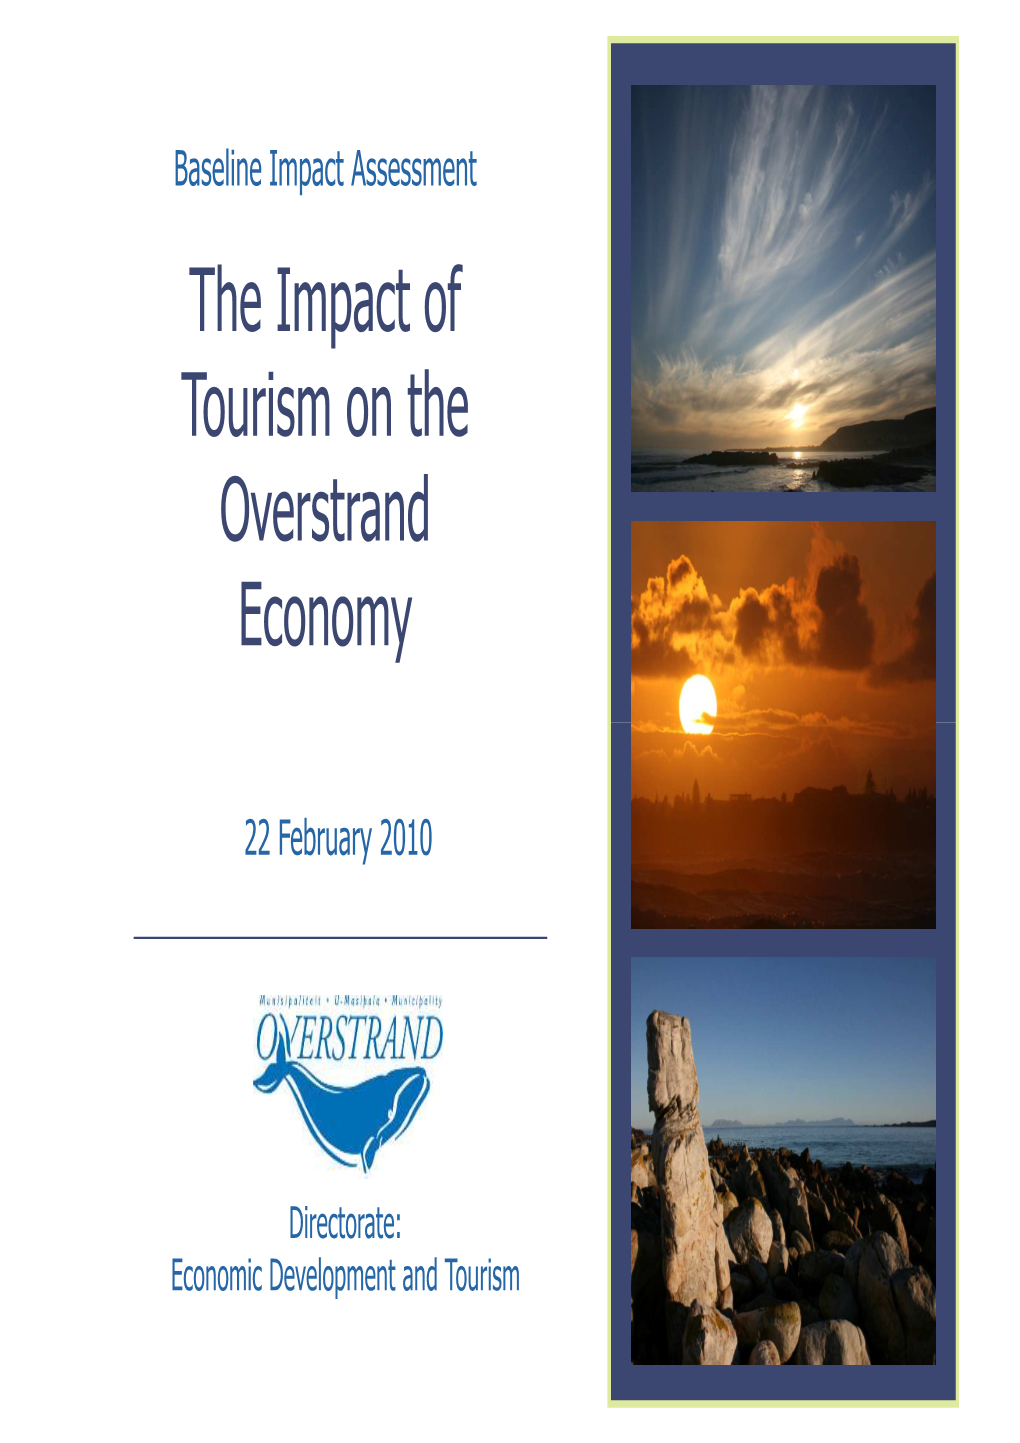 The Impact of Tourism on the Overstrand Economy